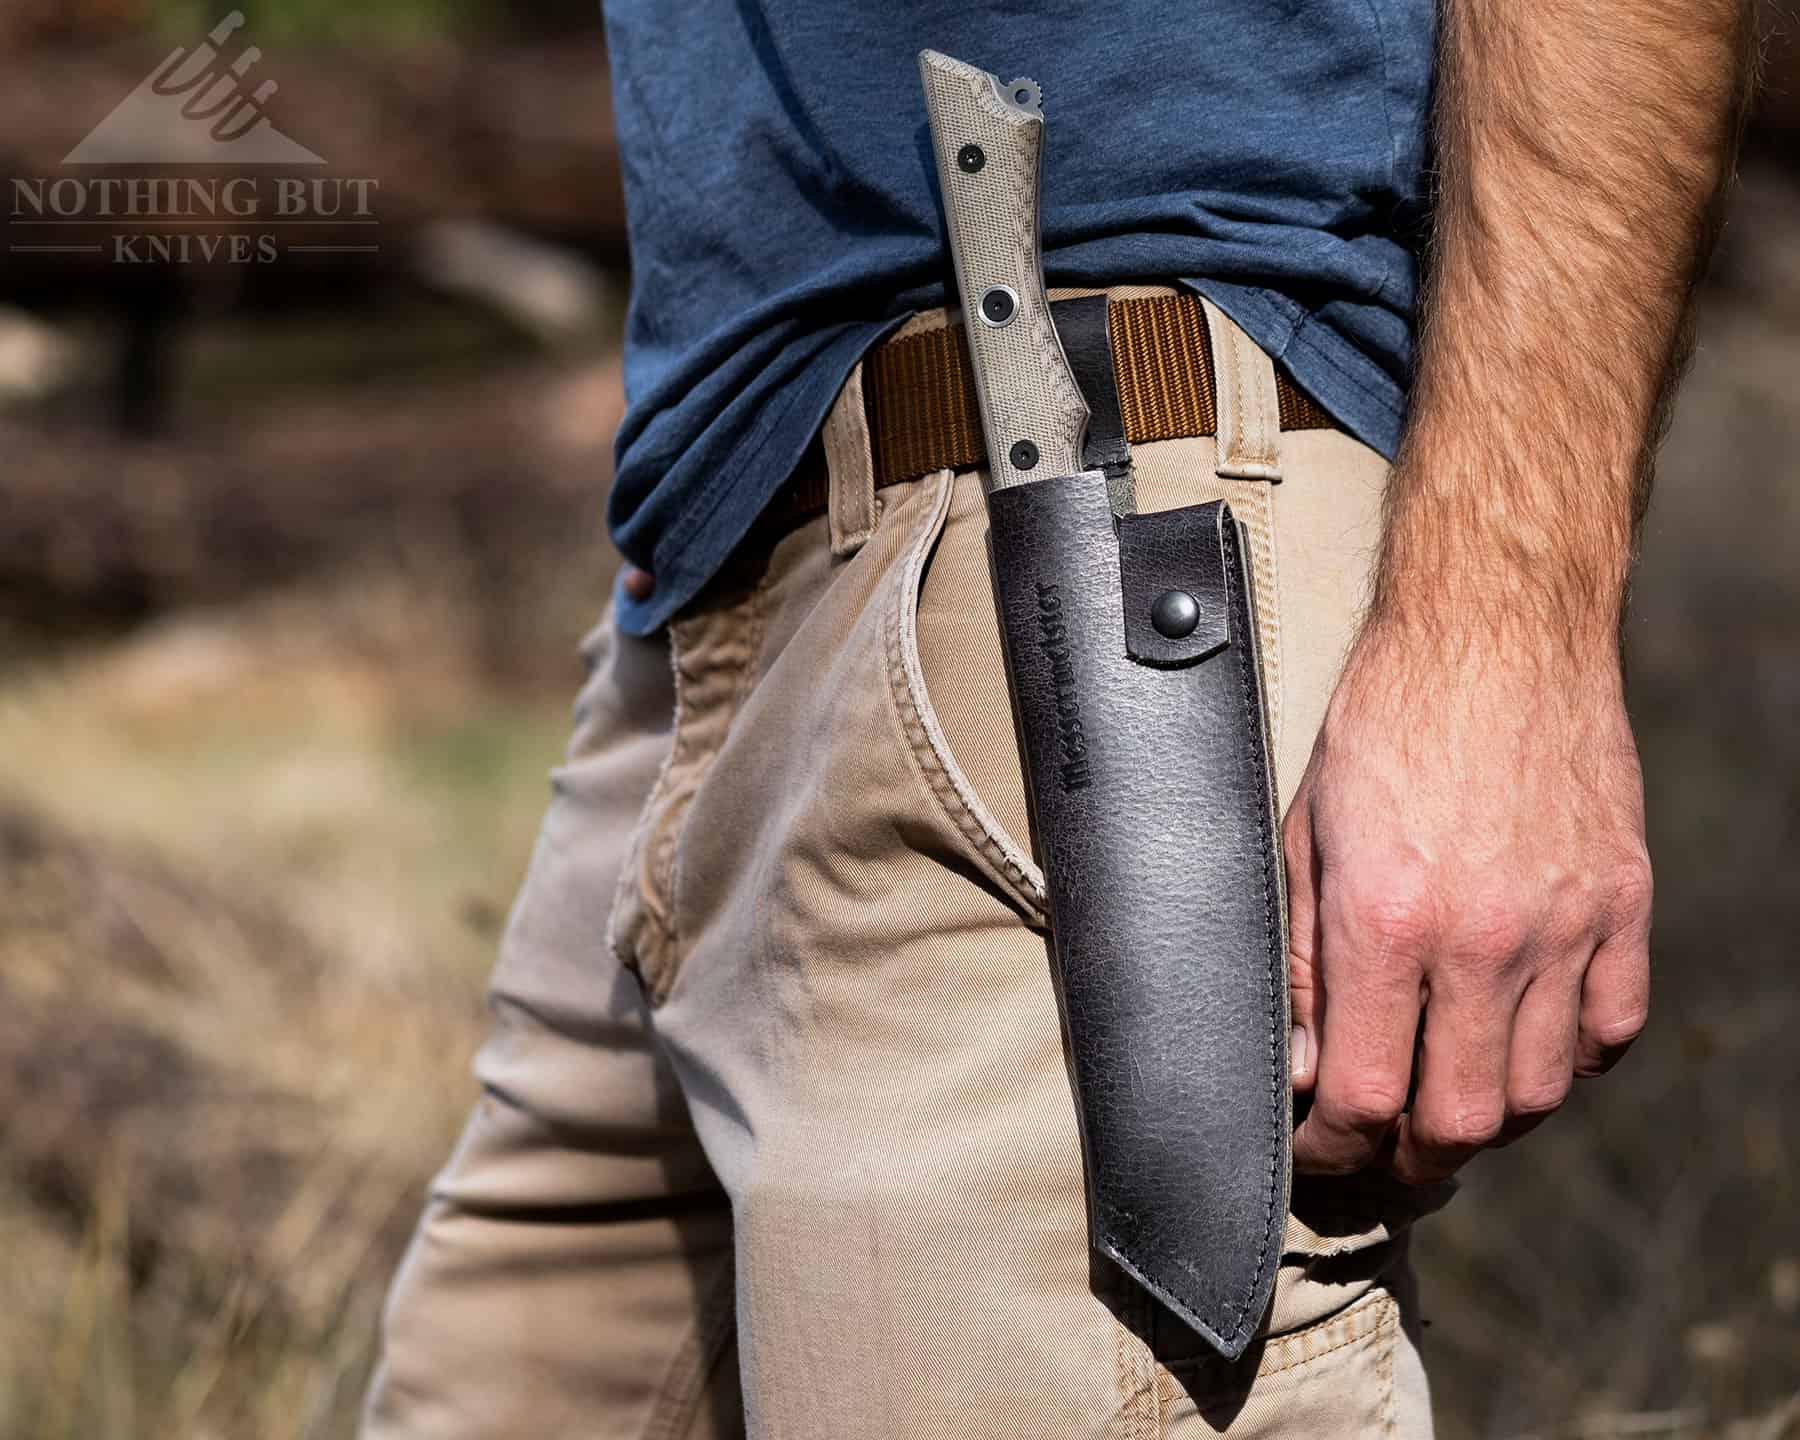 Messermeister offers a leather sheath as an add-on component to the Overland, but it has to be bought separately.